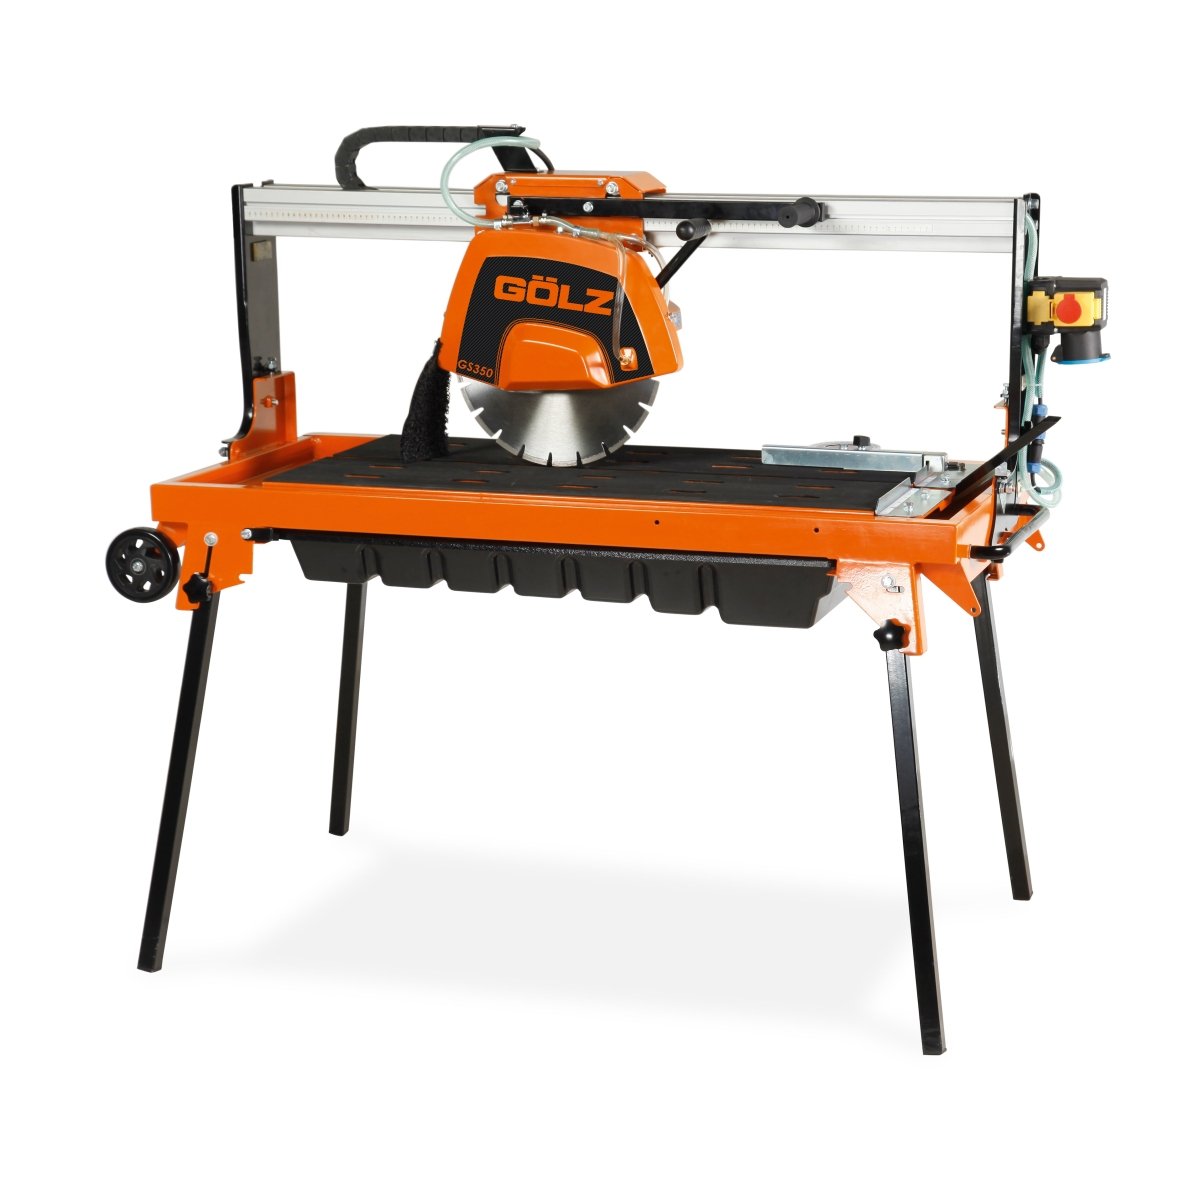 GOLZ GS350 Table Saw